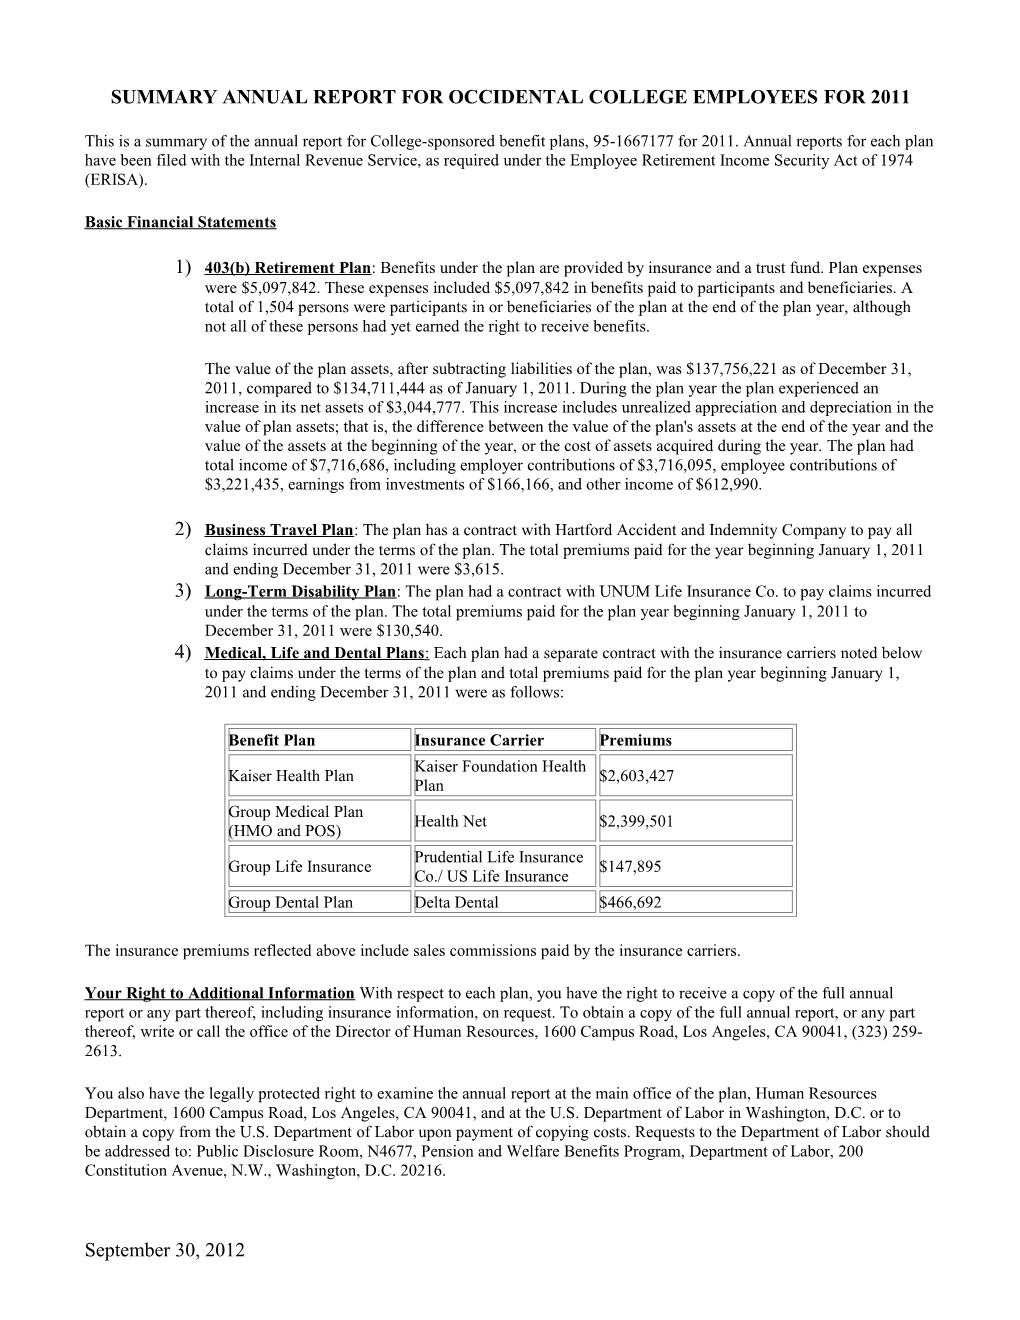 Summary Annual Report for Occidental College Employees for 2009